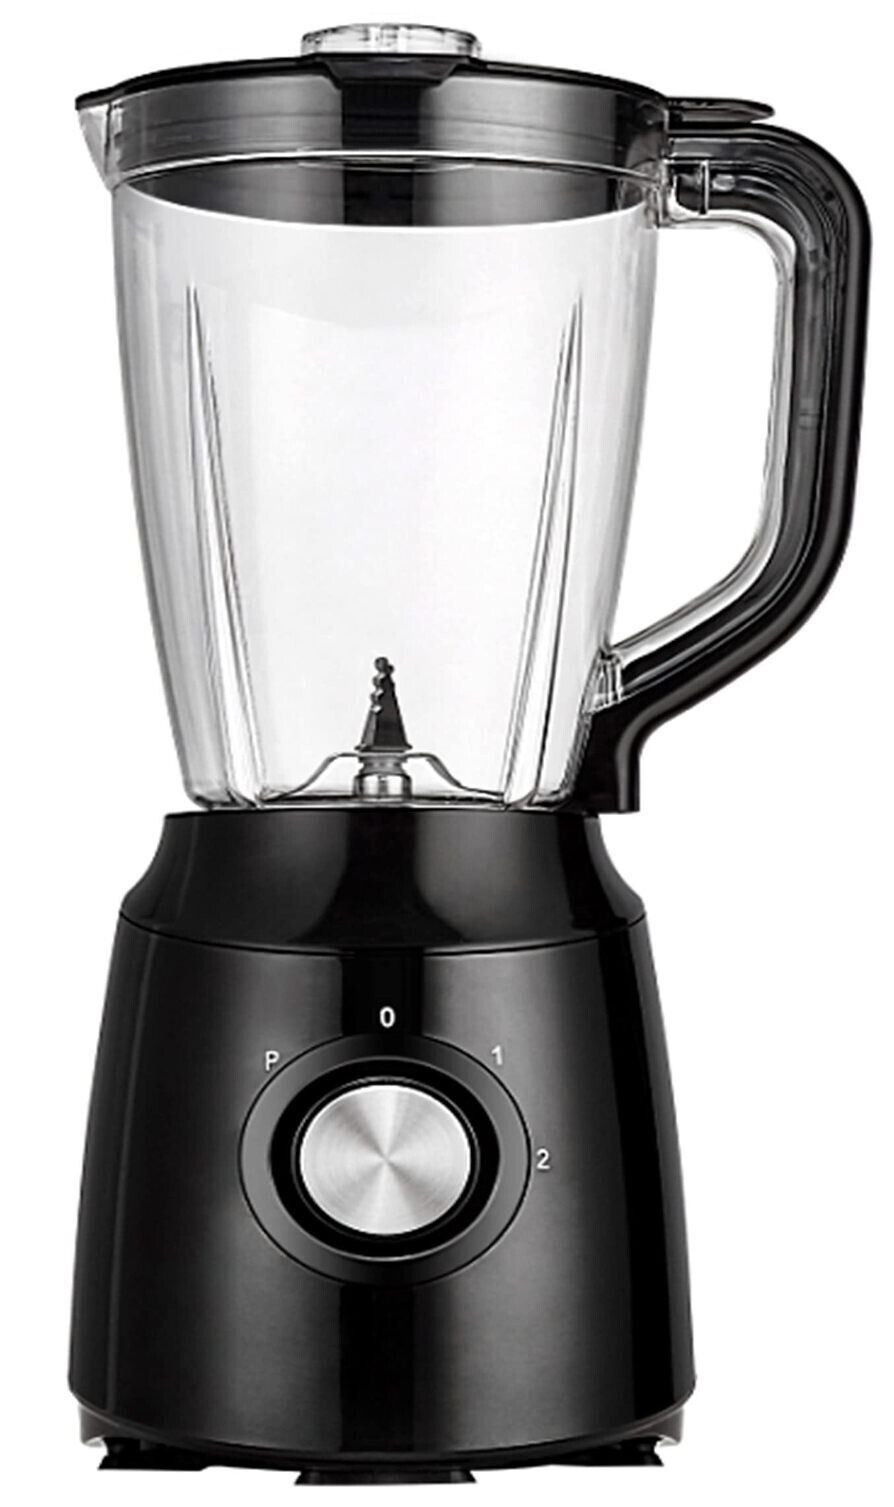 Up to 70% off Certified Refurbished NutriBullet Pro 900W with 32oz  High-Speed Blender Mixer System